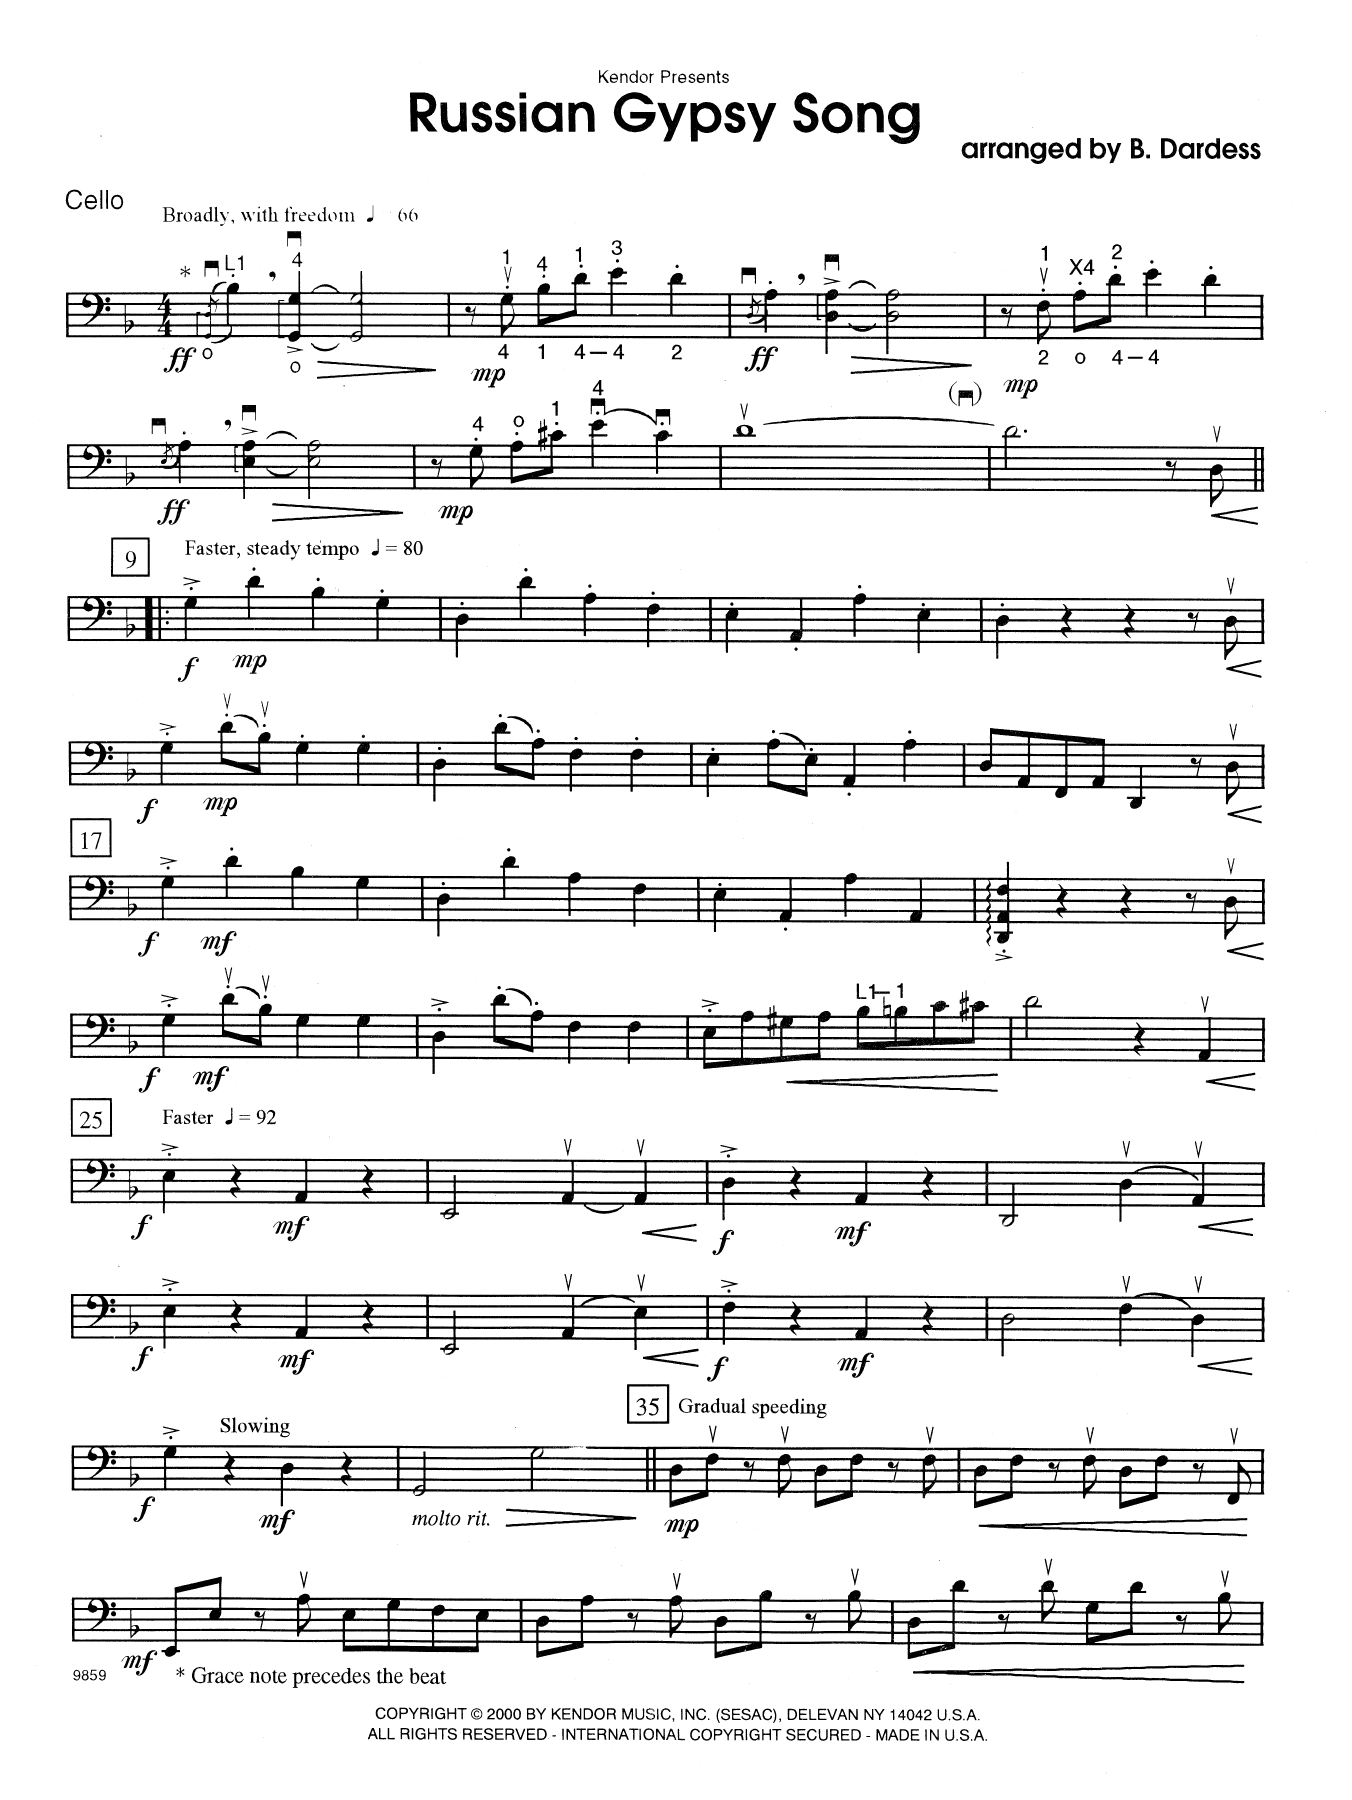 Download Betty Dardess Russian Gypsy Song - 1st Cello Sheet Music